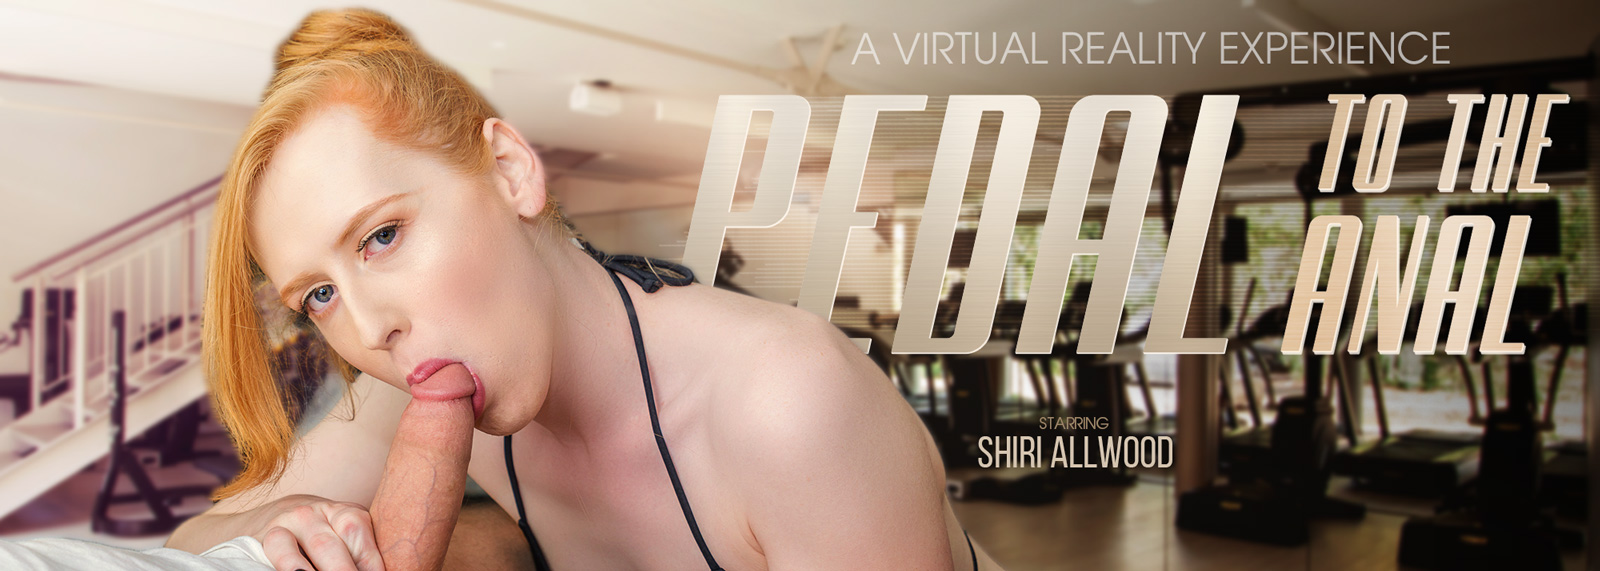 Pedal to the Anal - VR Porn Video, Starring Shiri Allwood VR